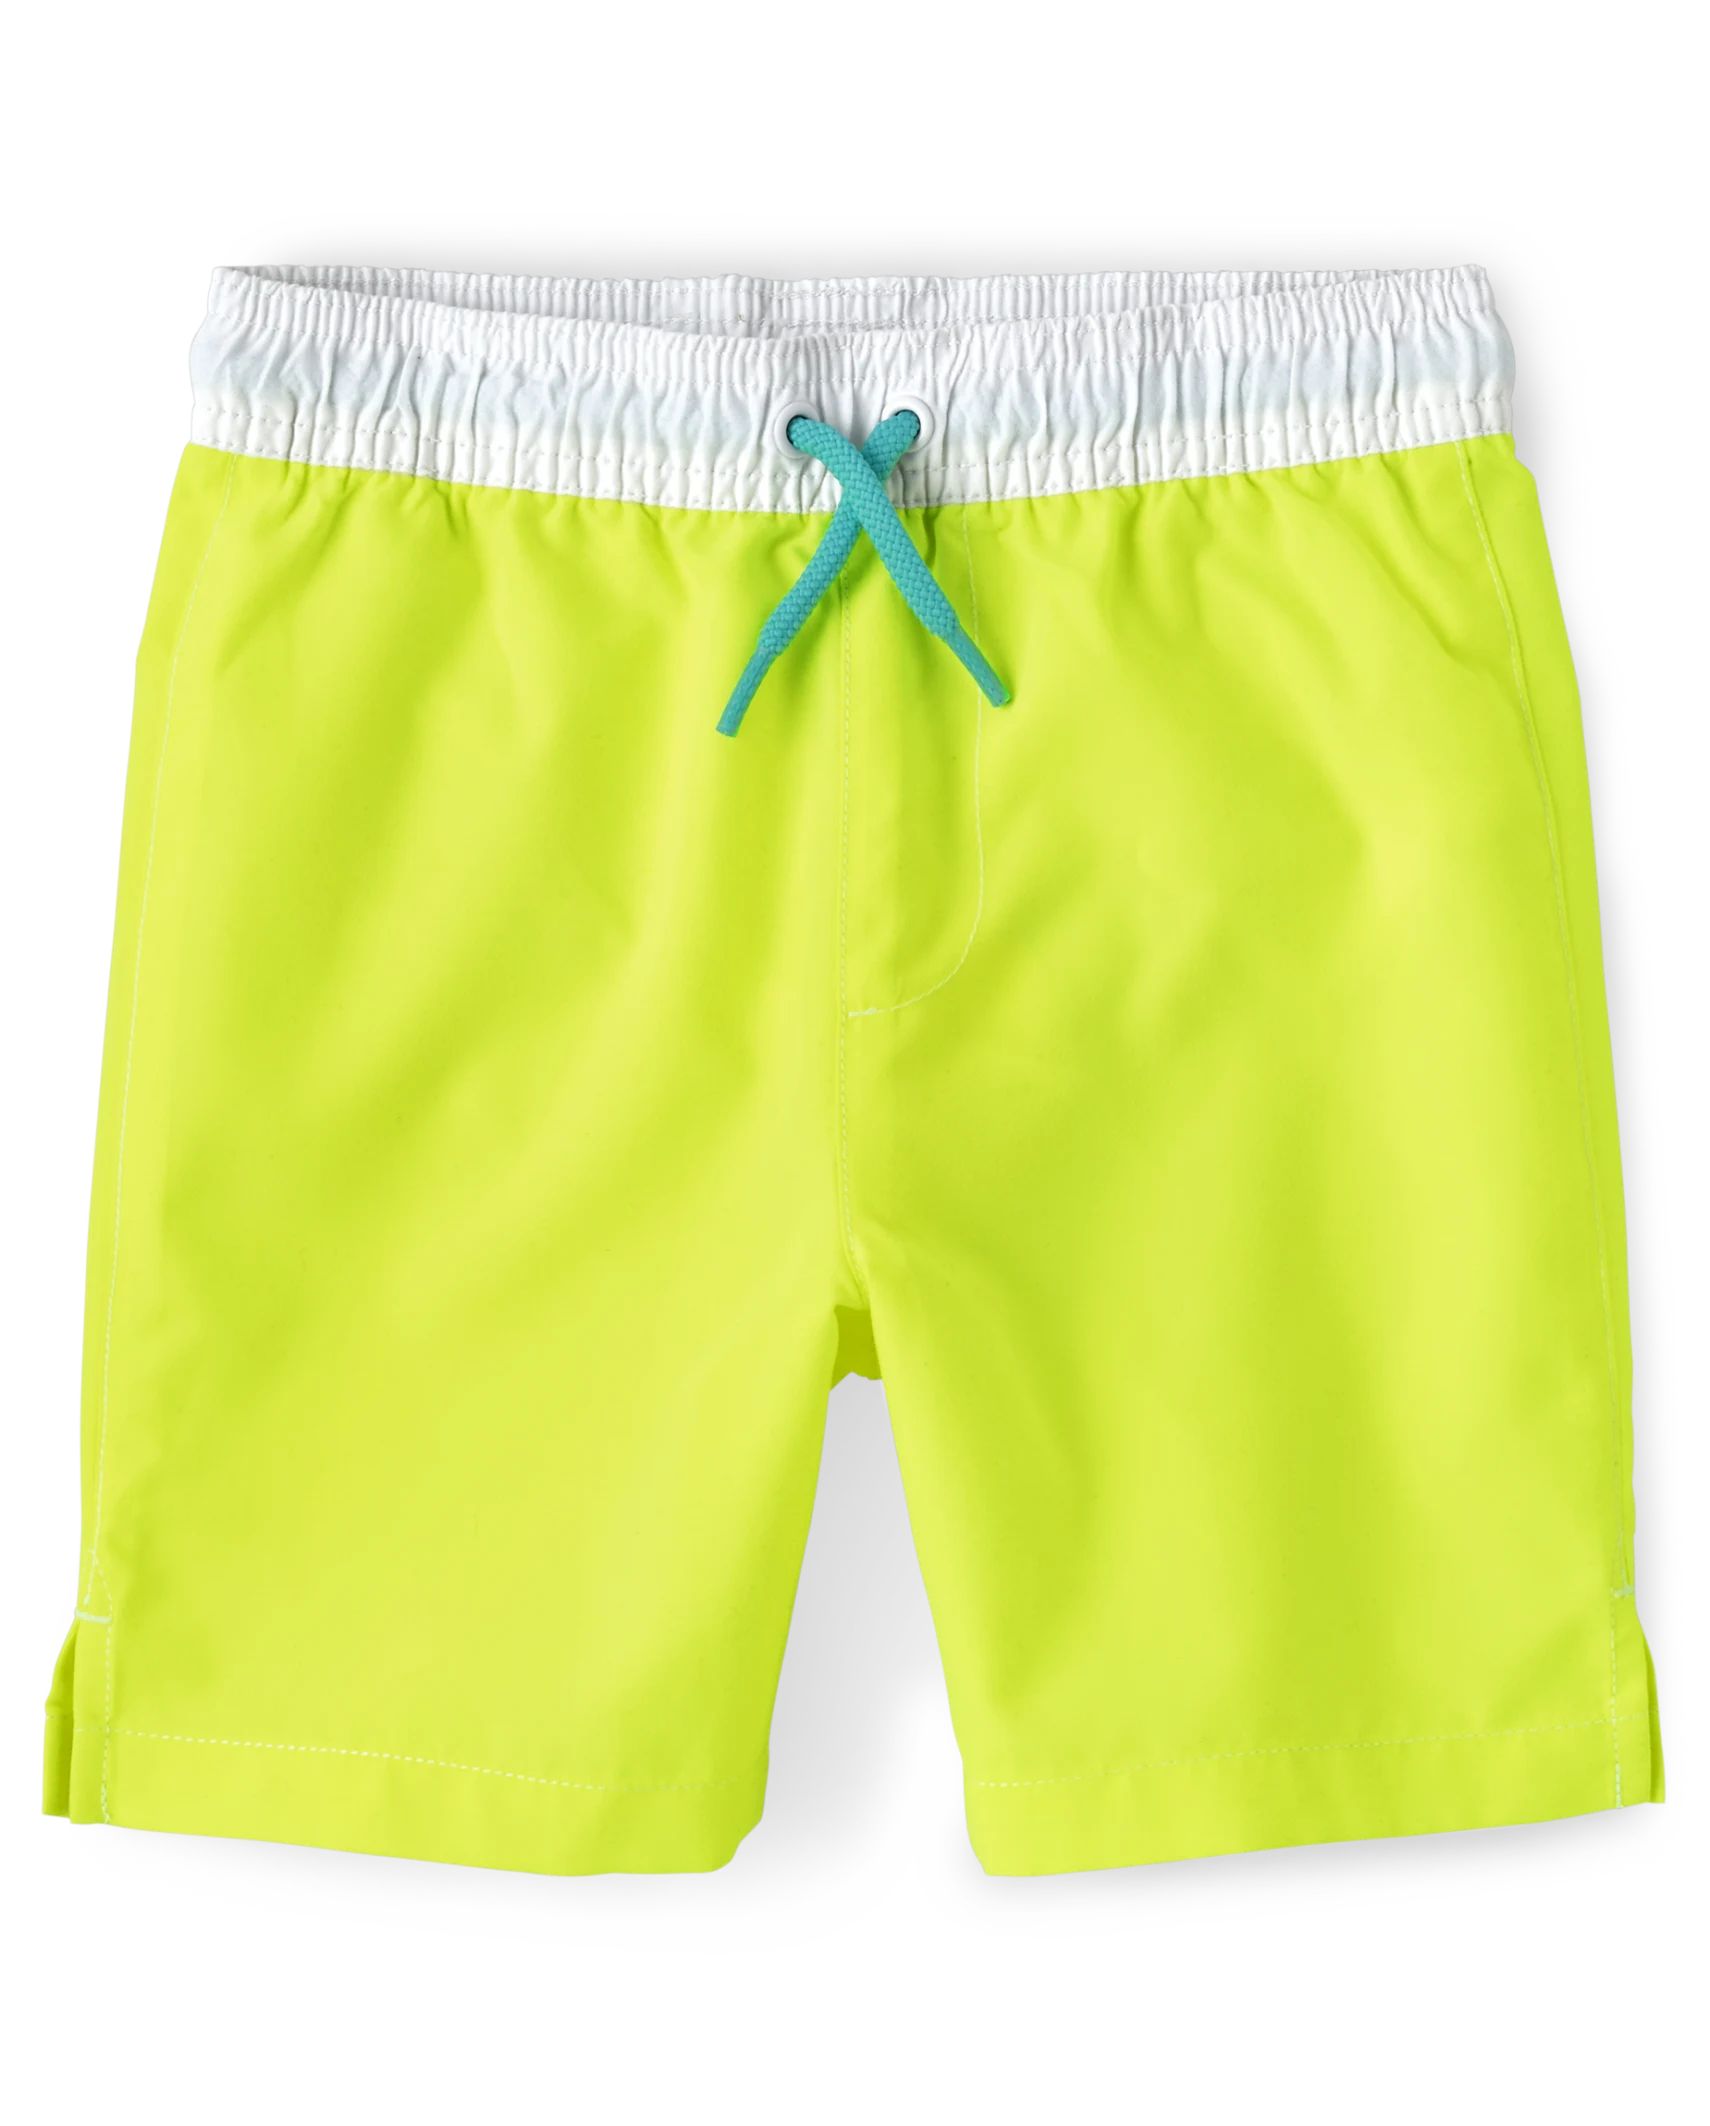 Baby And Toddler Boys Colorblock Swim Trunks - tweakyelow | The Children's Place